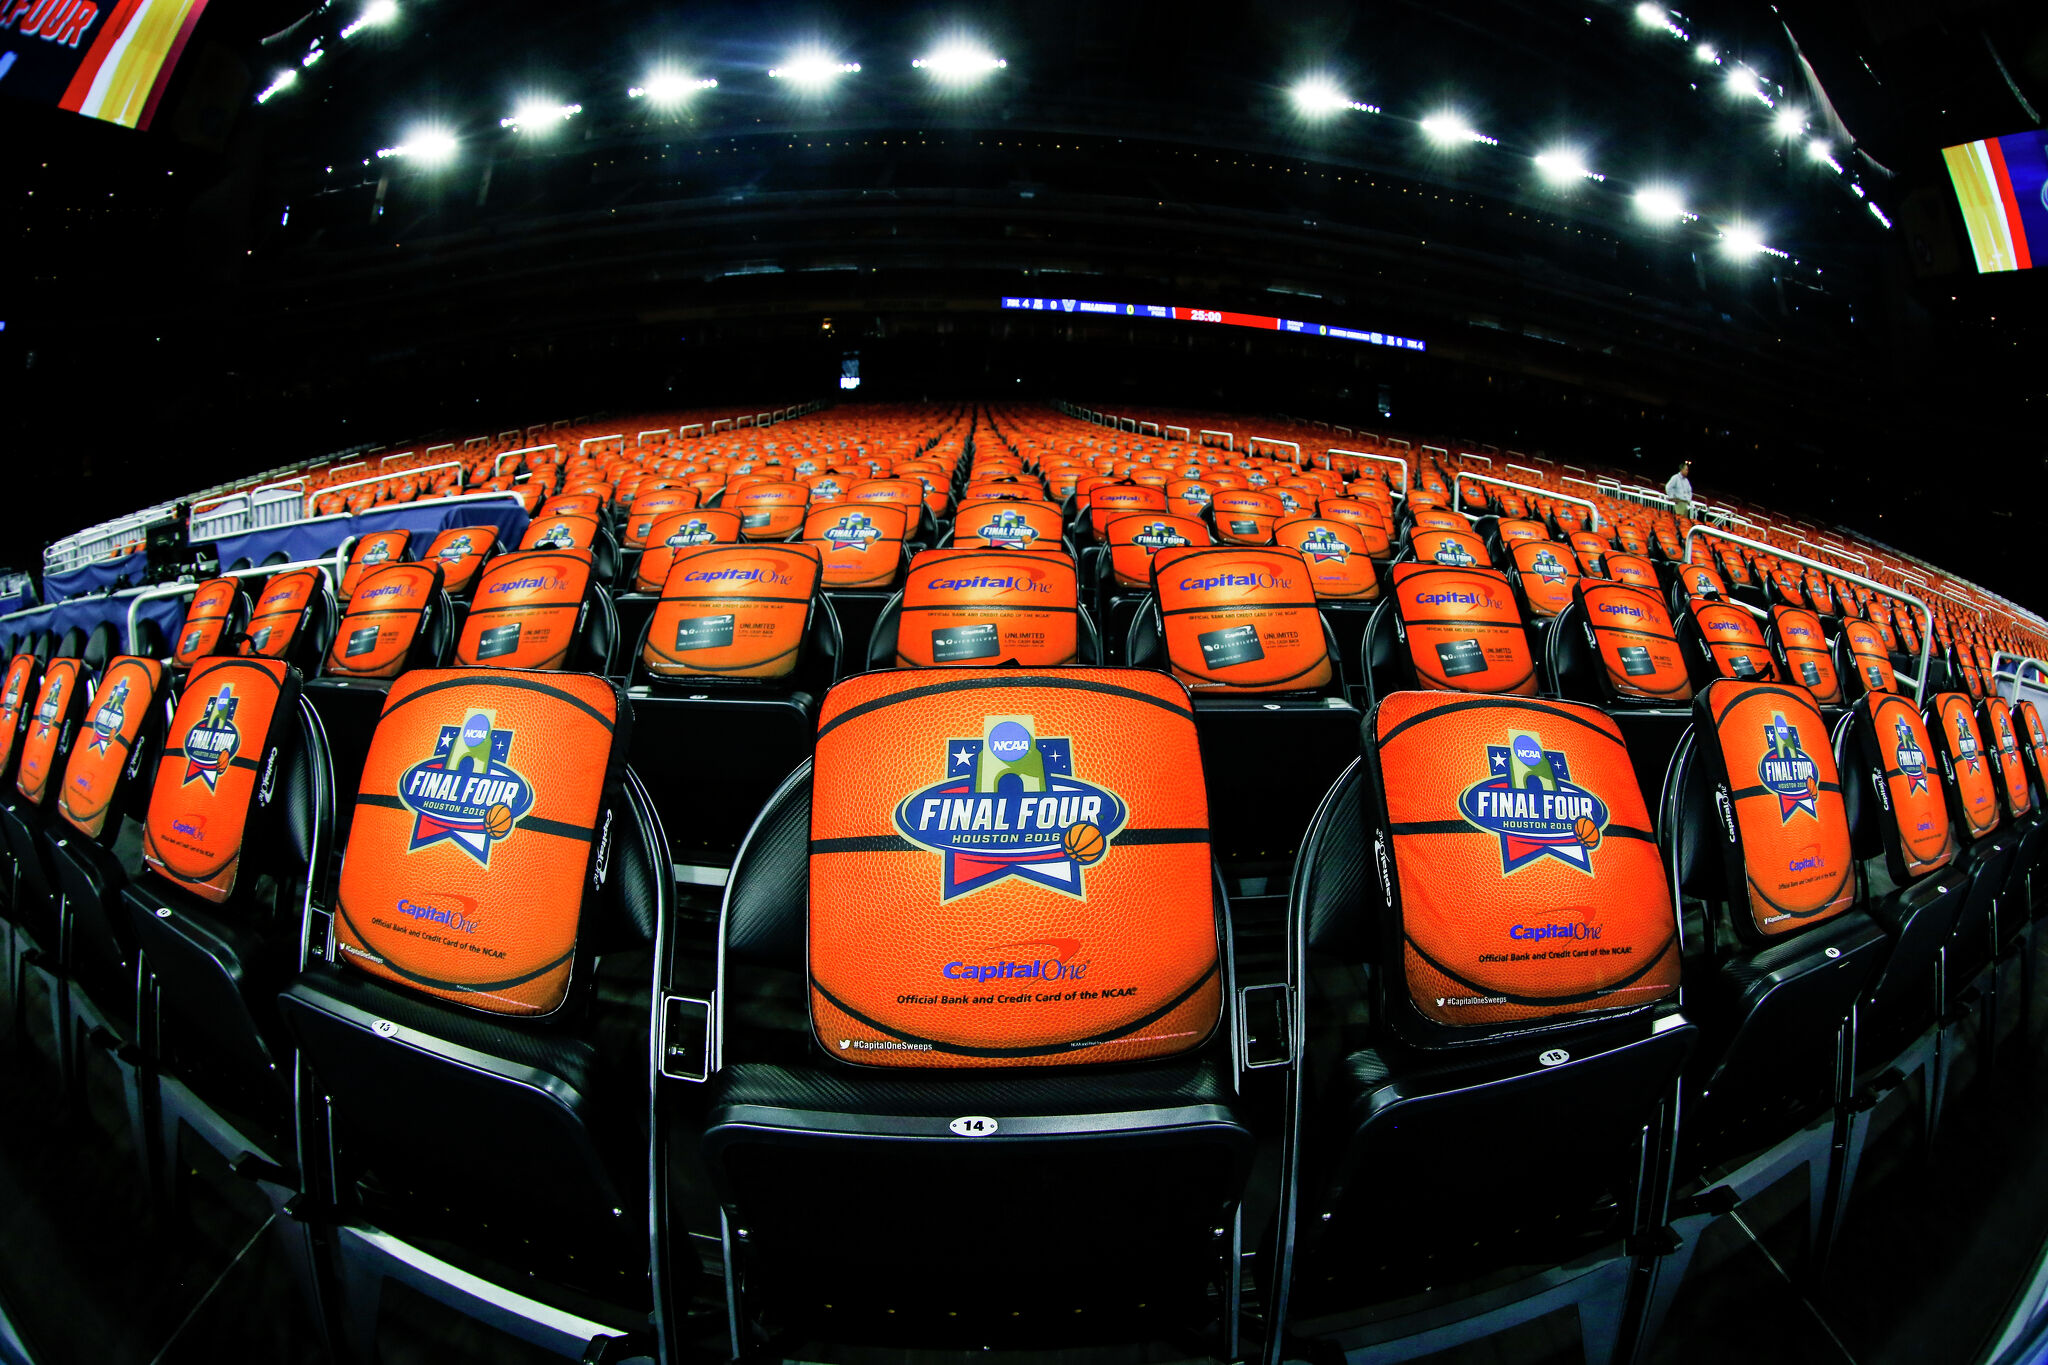 Final Four in Houston What events to expect this weekend and when